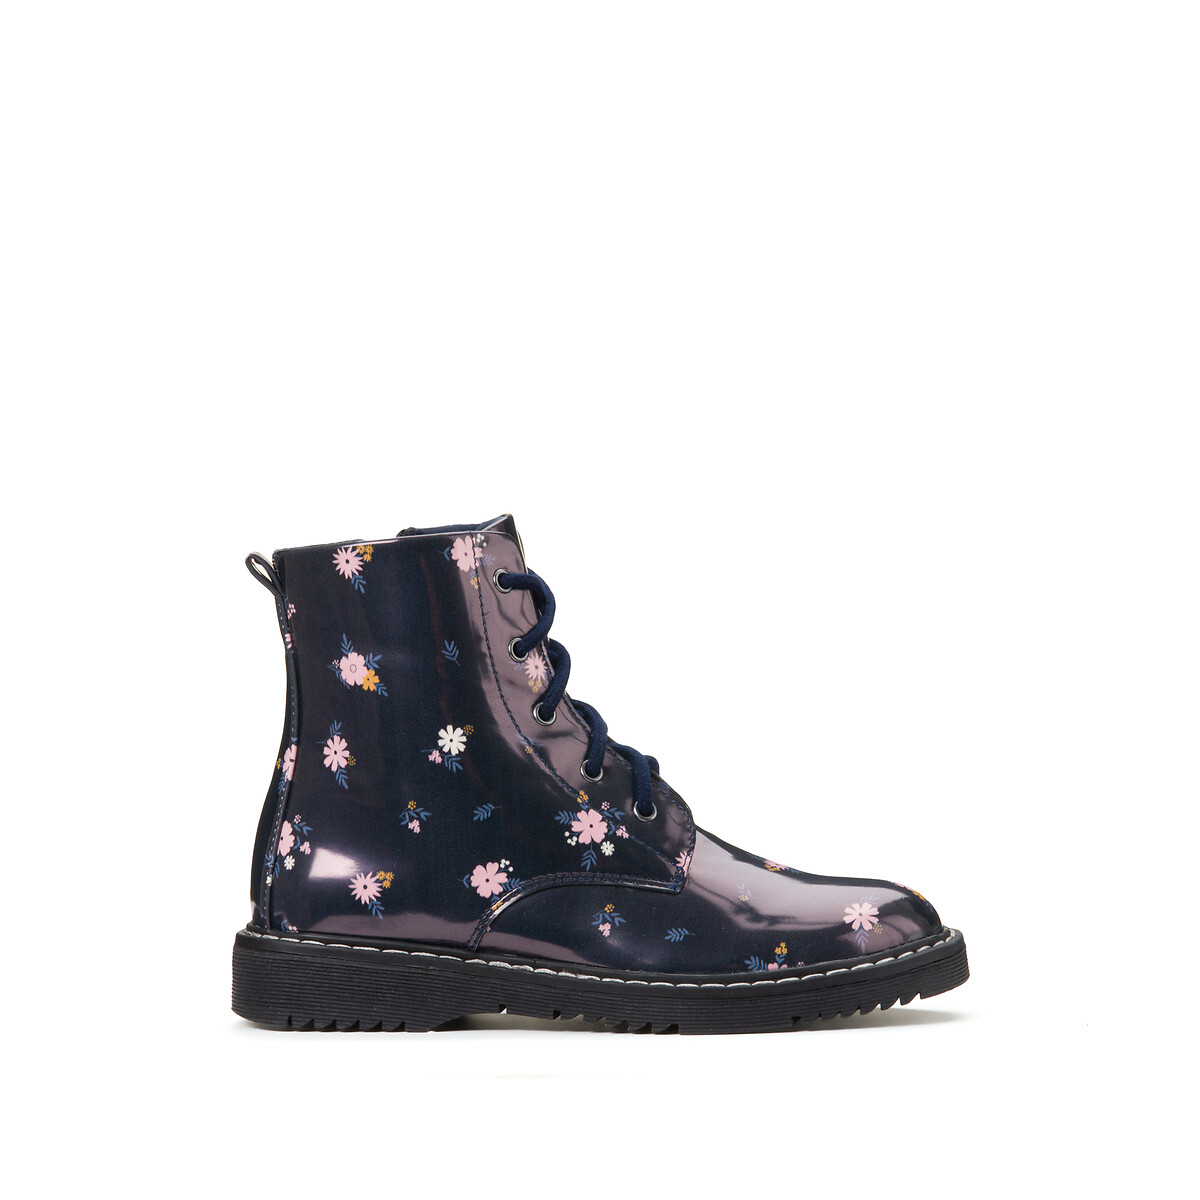 Kids High Ankle Boots in Floral Print